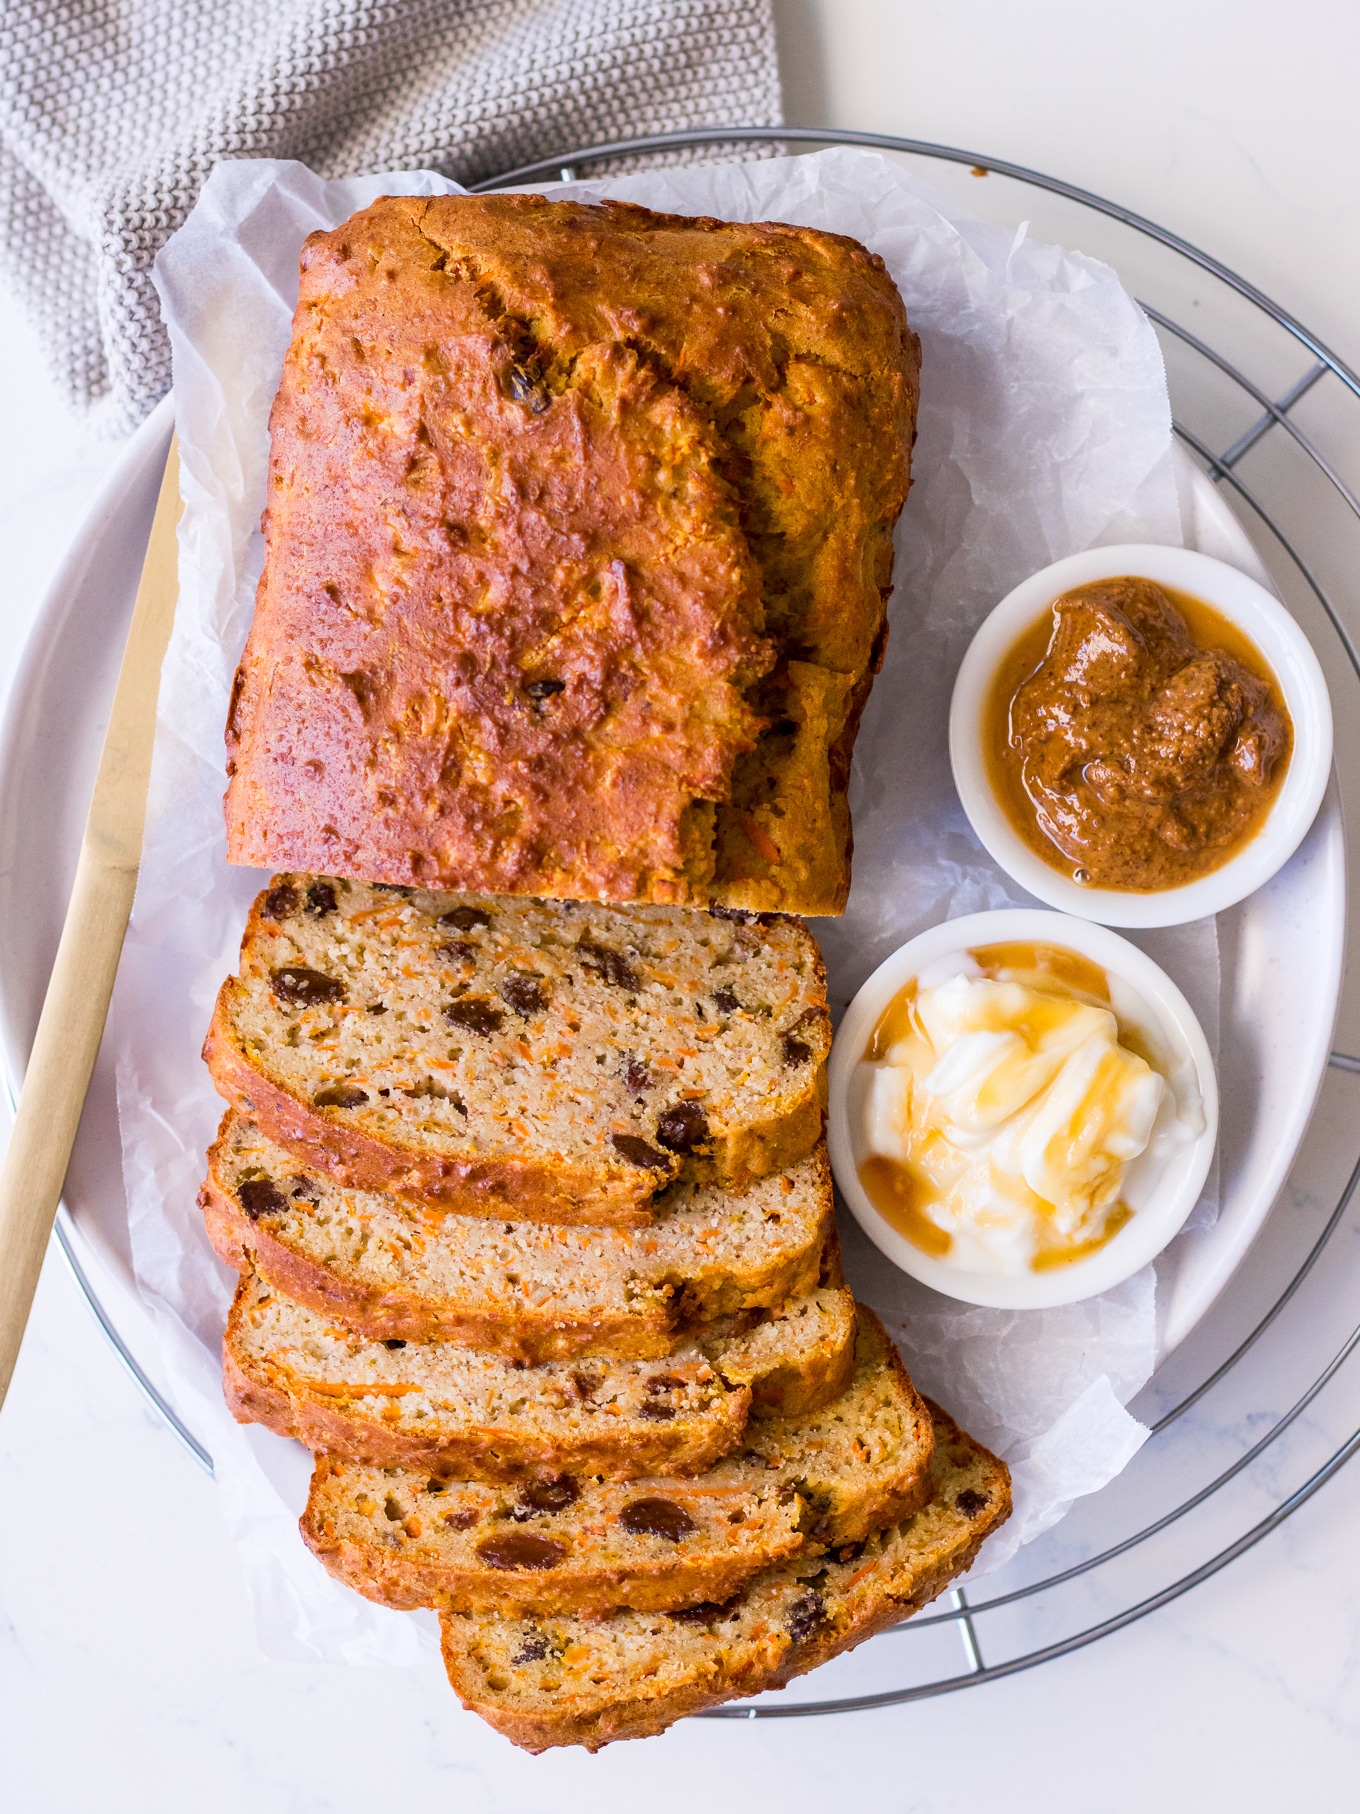 Banana, carrot and sultana loaf cake sliced with ricotta, honey and almond butter